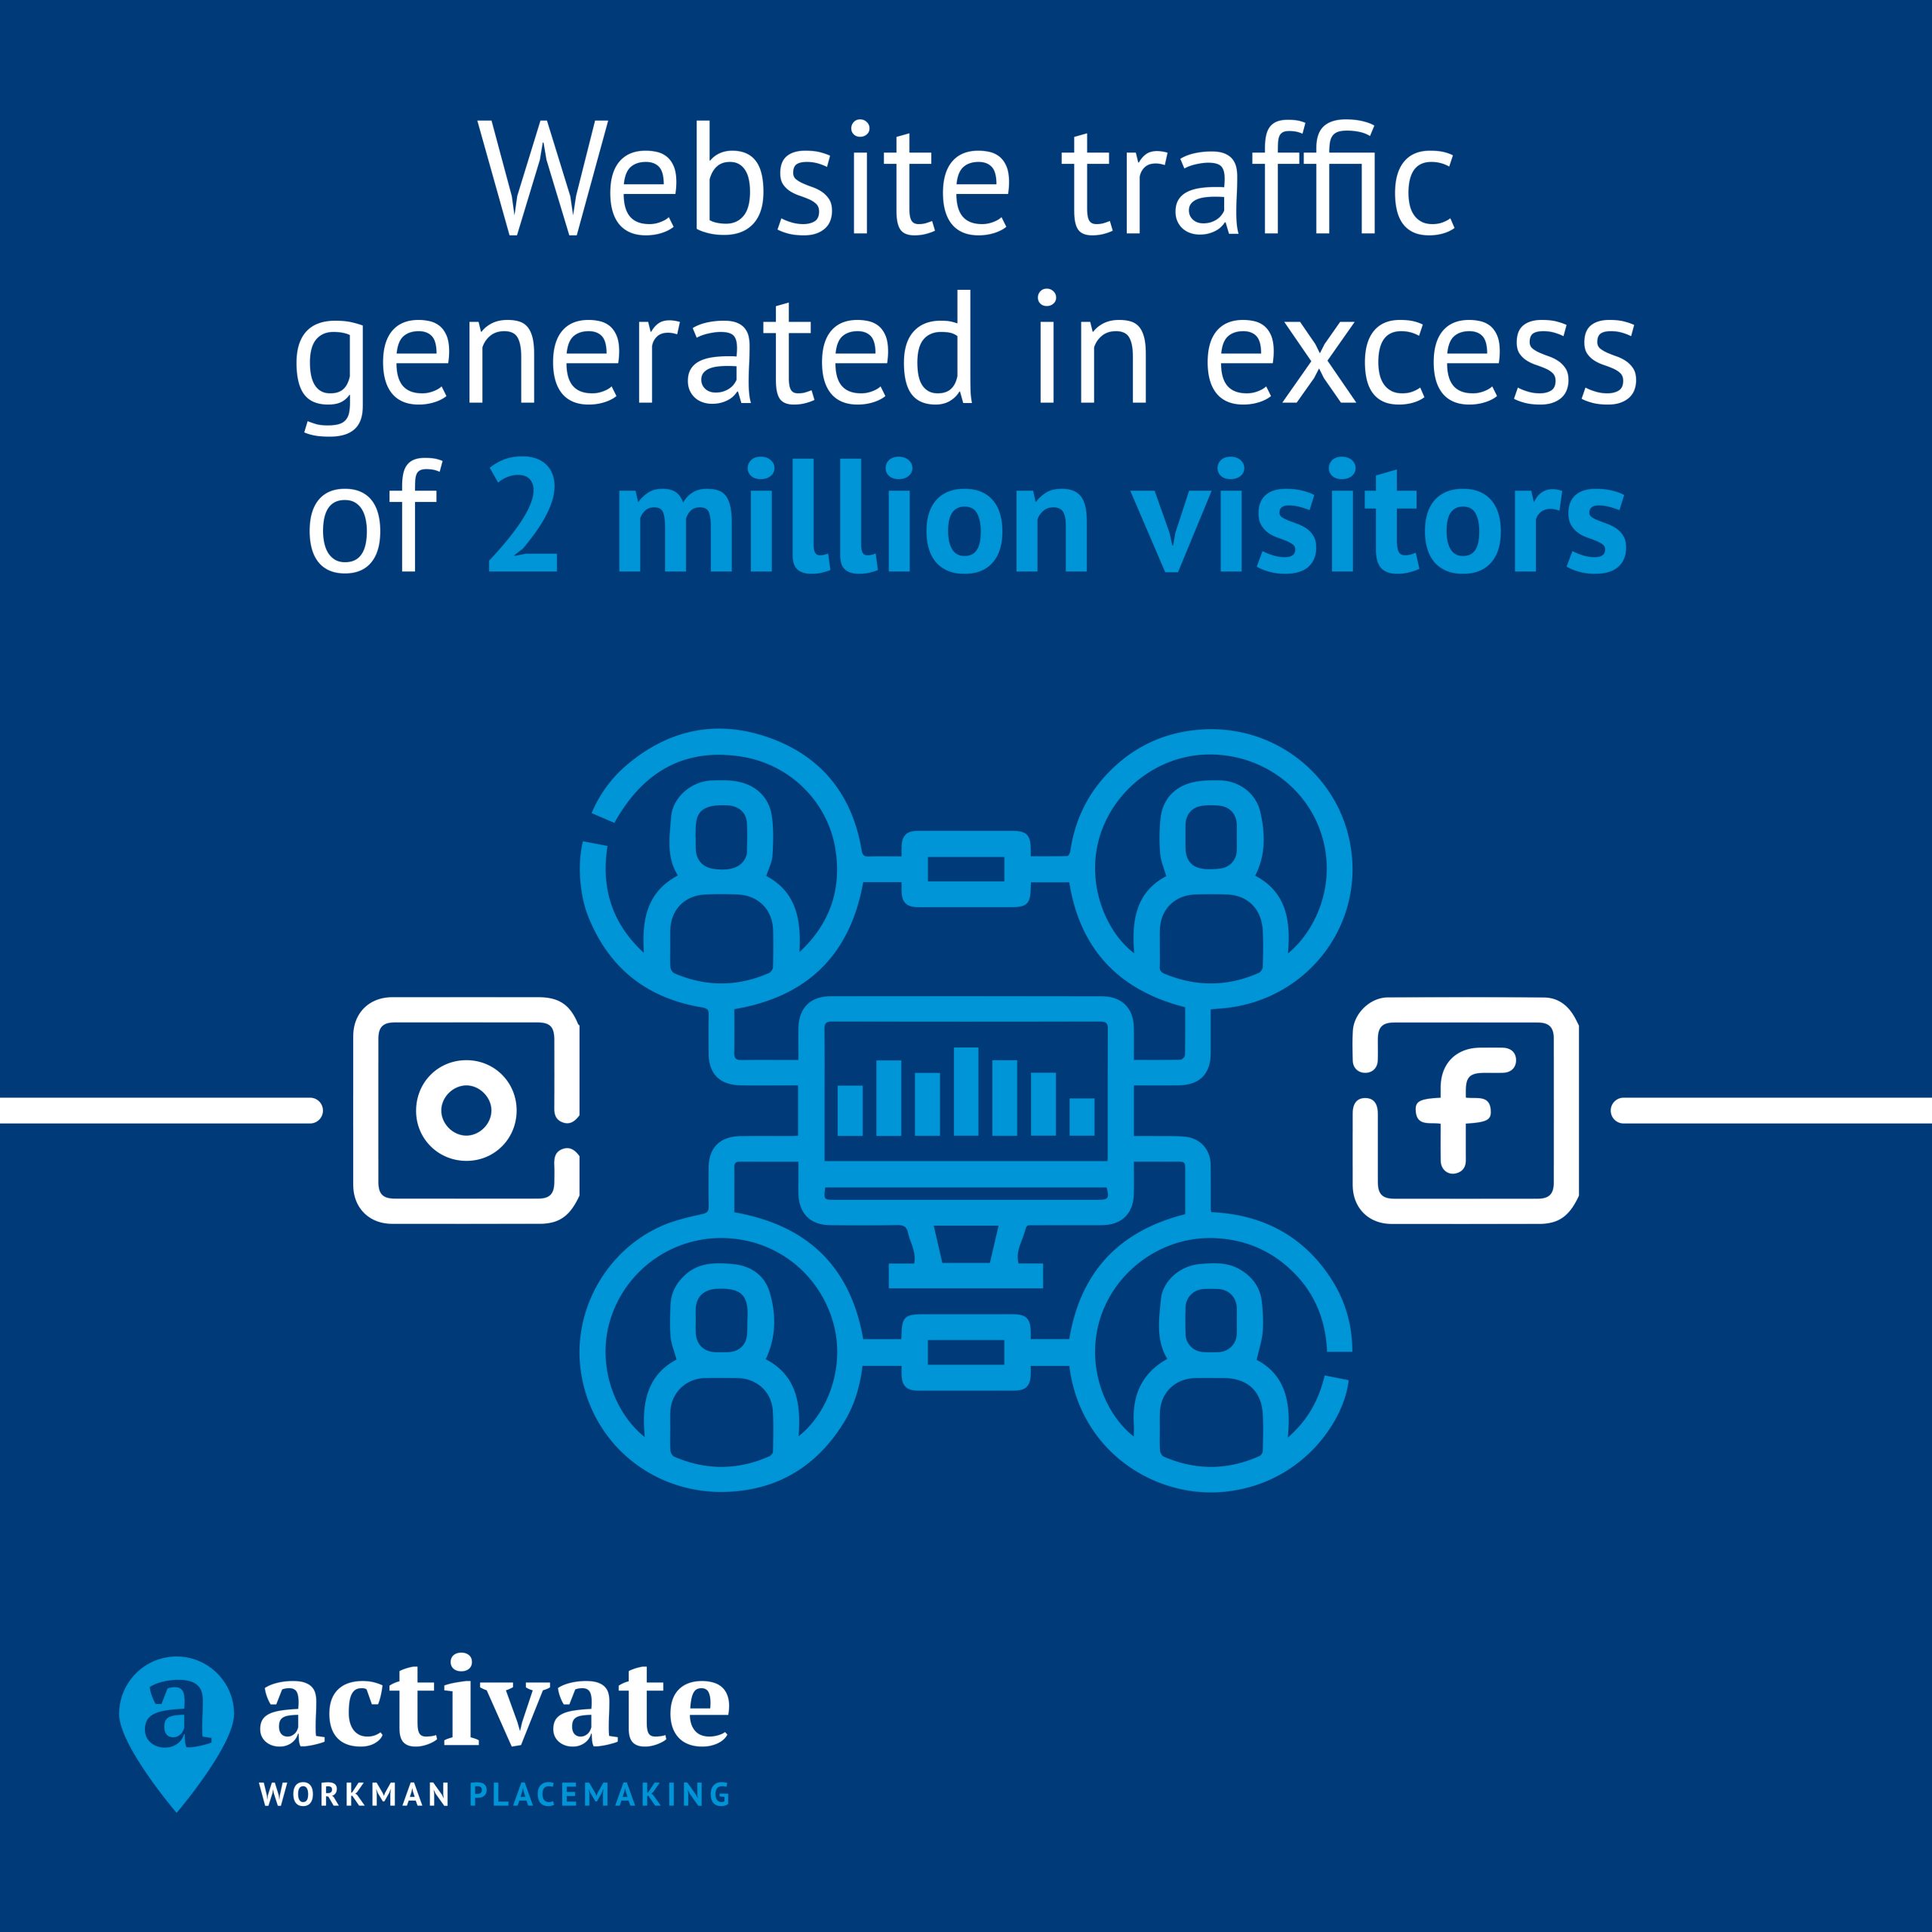 Website traffic generated in excess of 2 million visitors